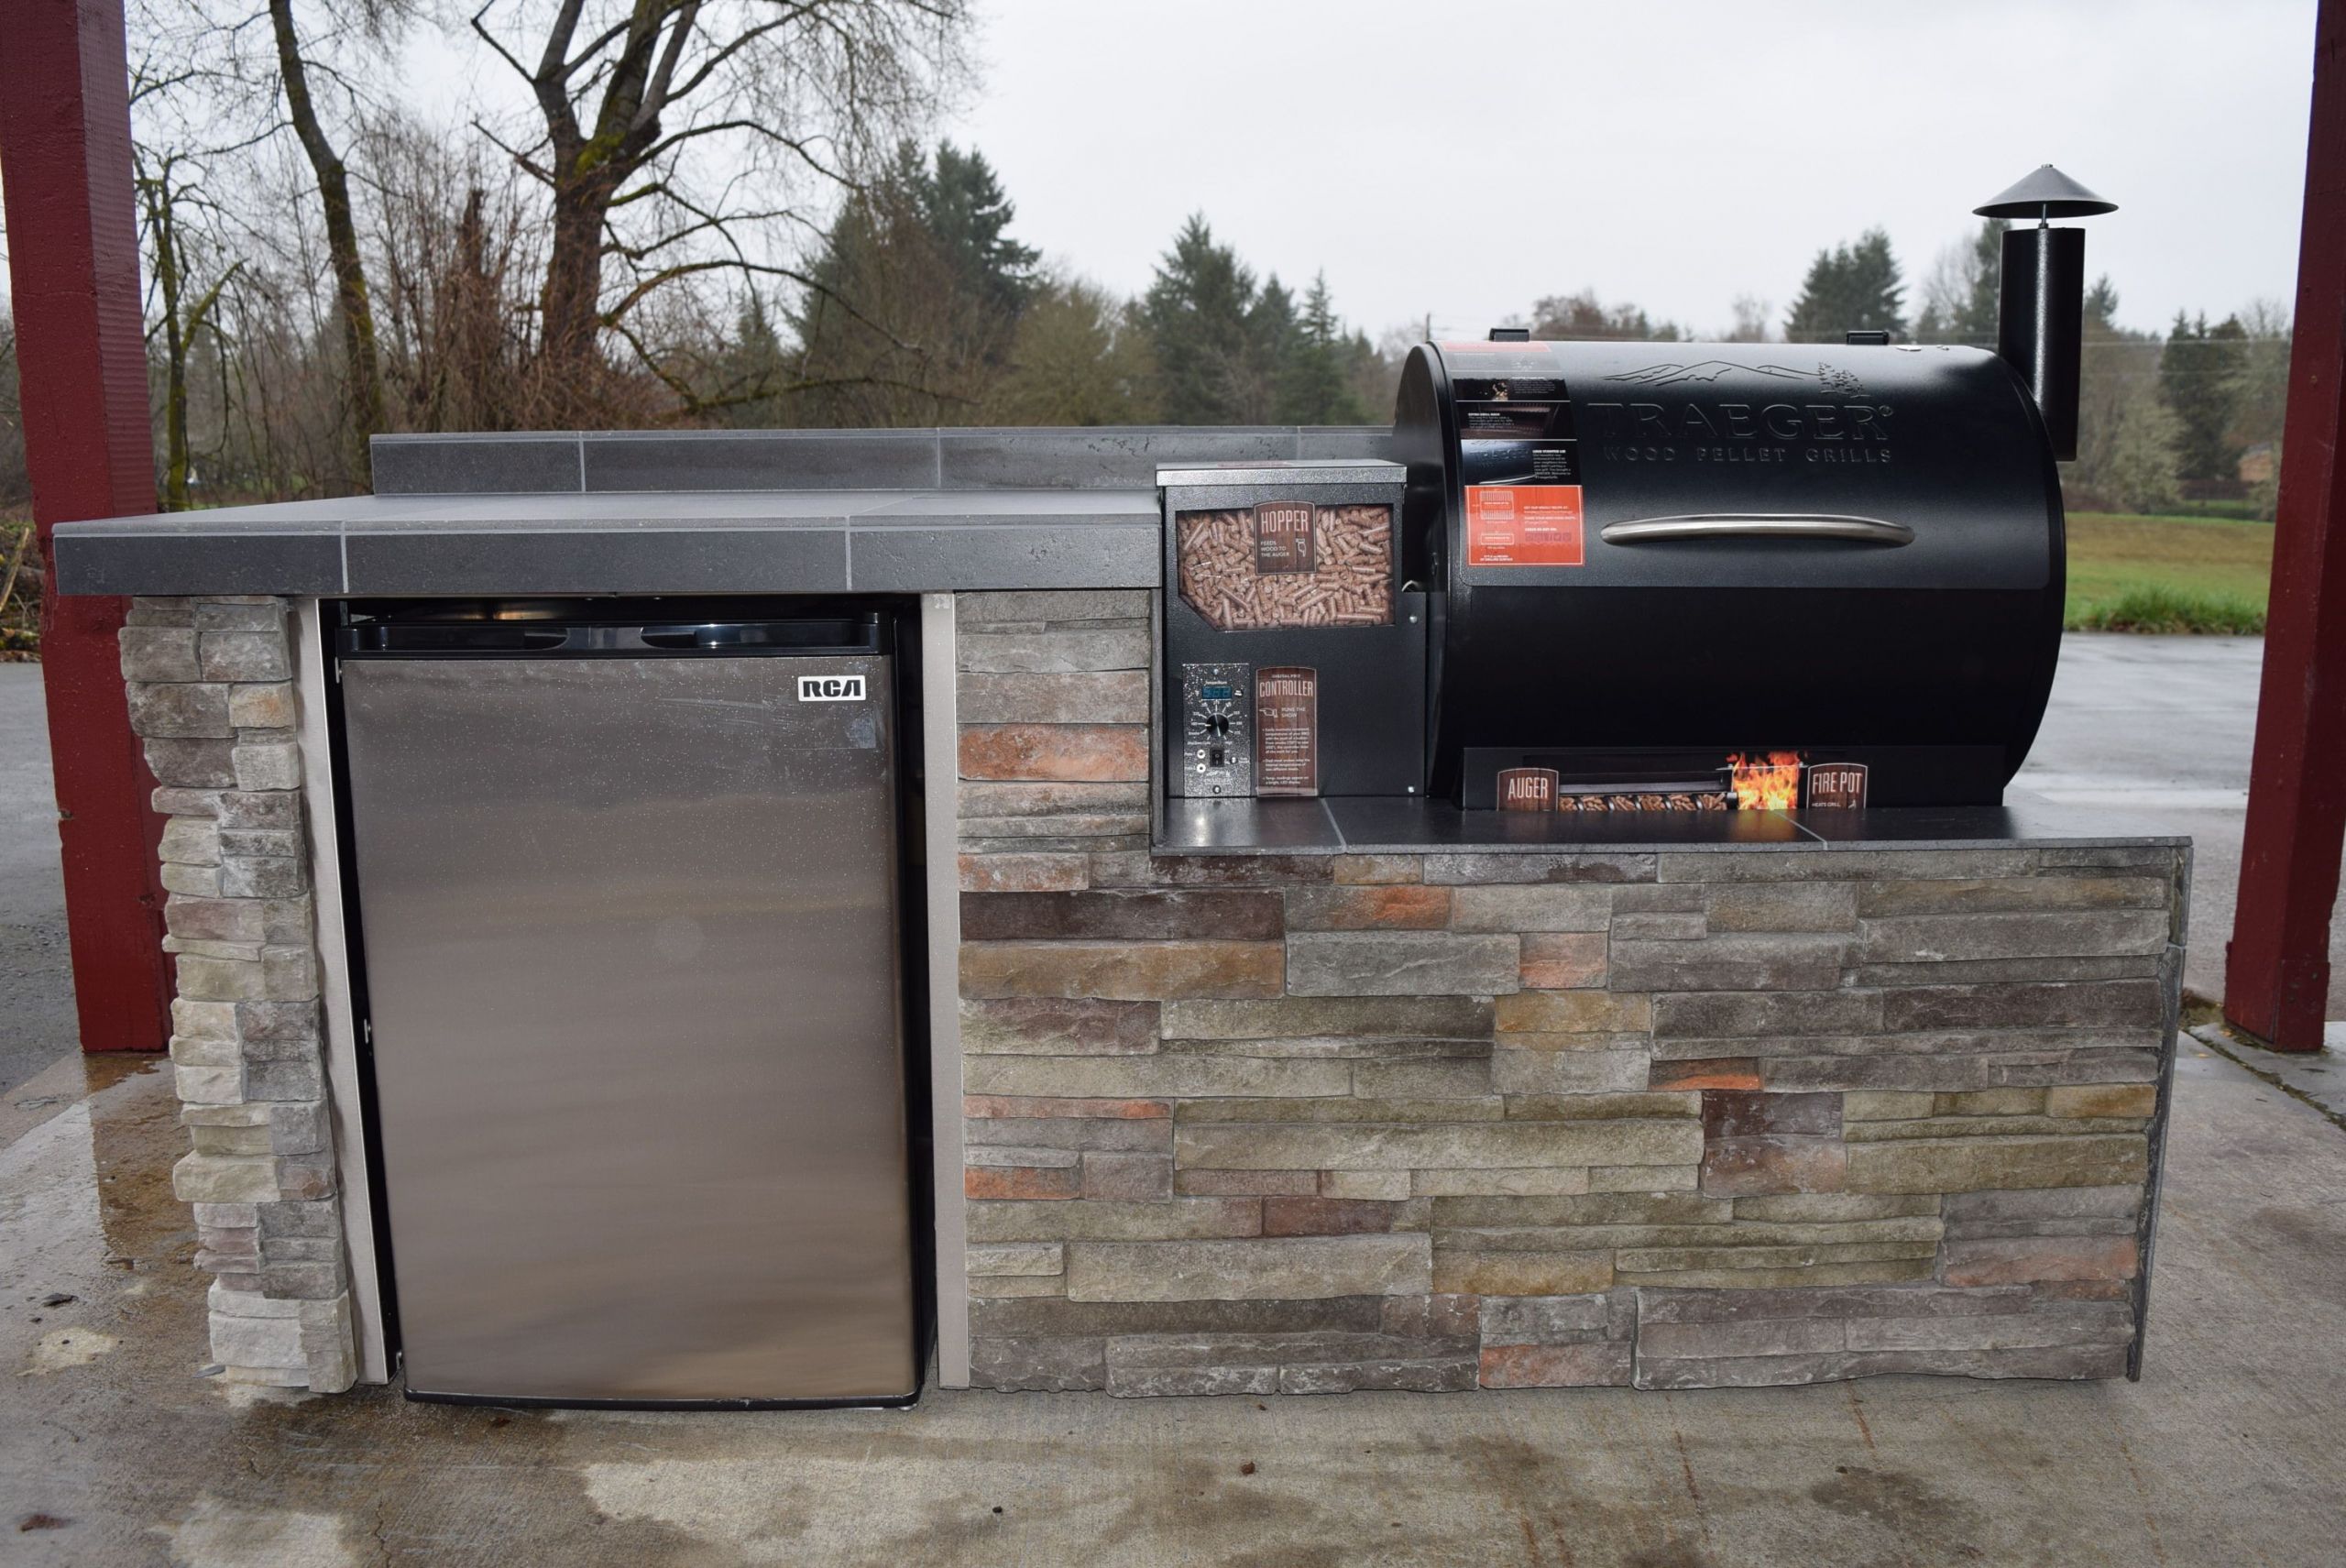 Traeger Built In Outdoor Kitchen
 Outdoor kitchen for the Traeger pellet grill We custom